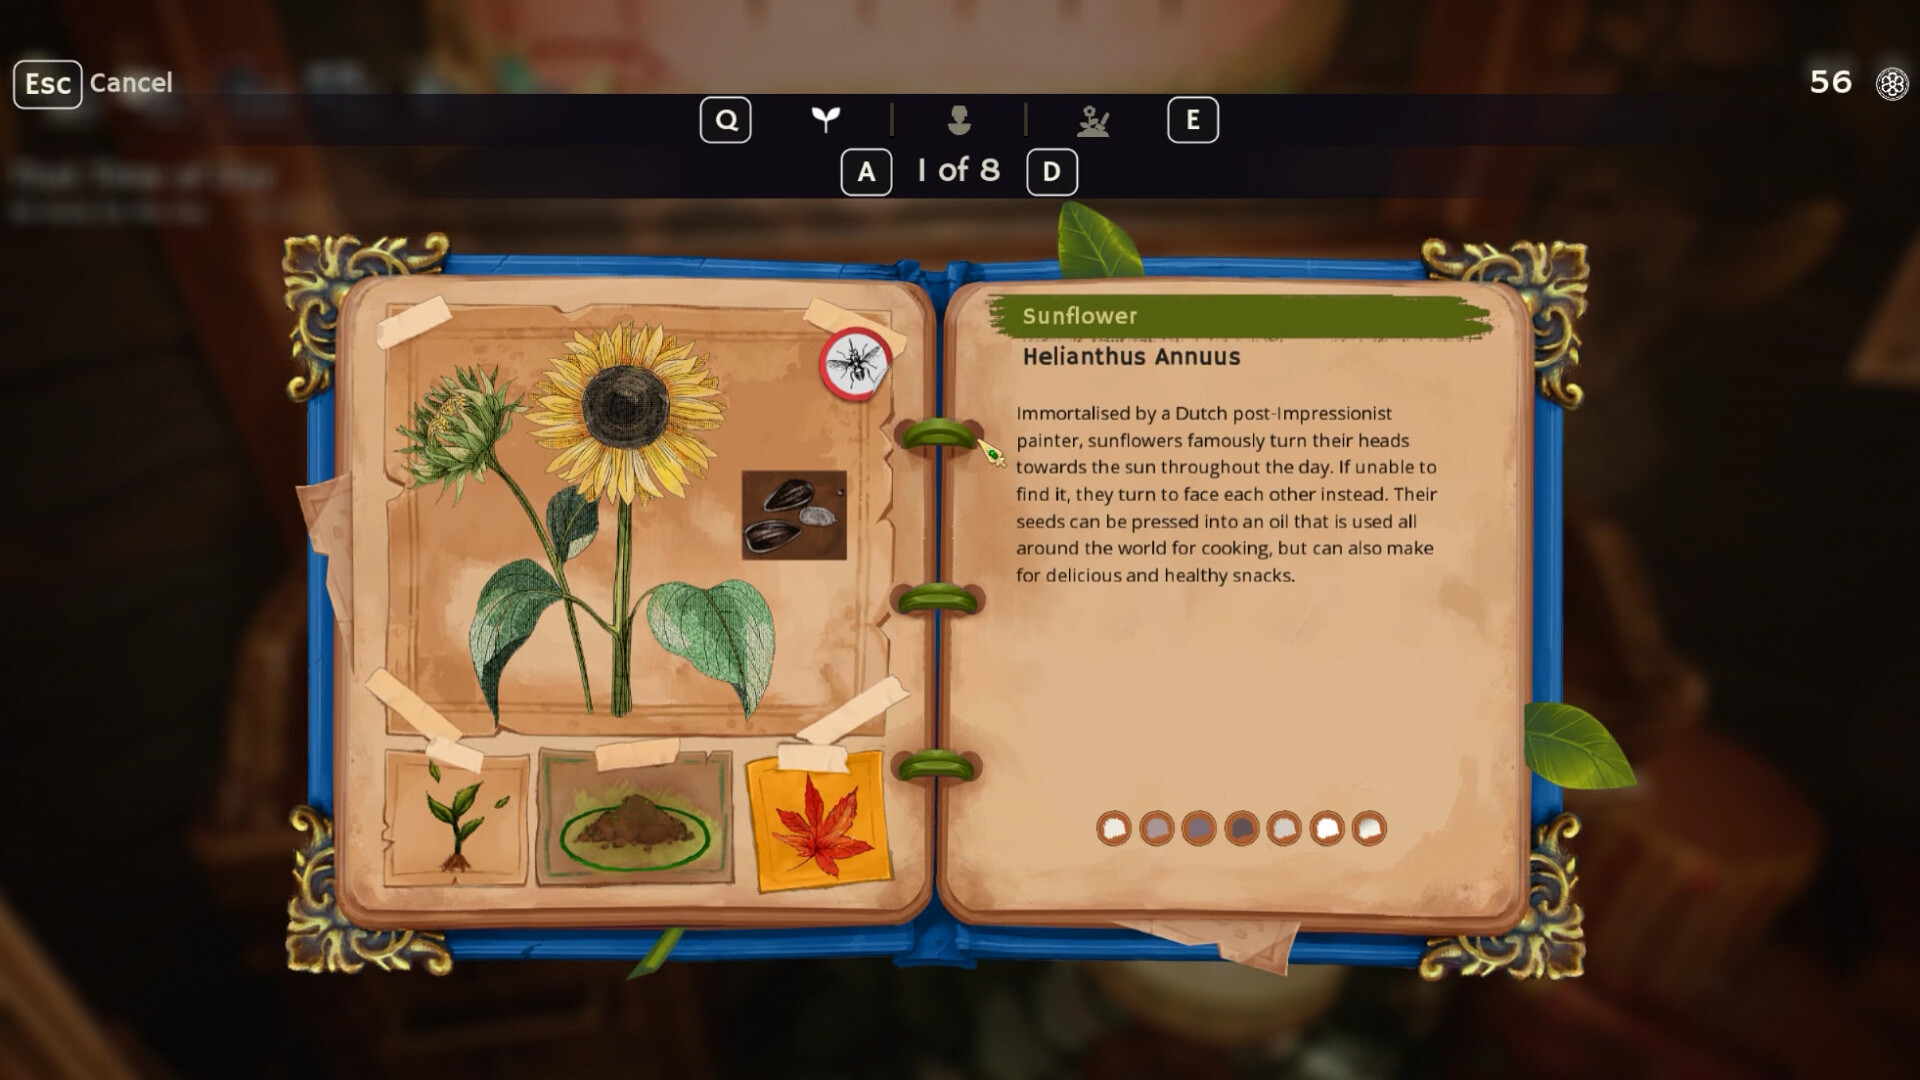 Garden Life: A Cozy Life Simulator Game Review - Crafting and customization options available to players